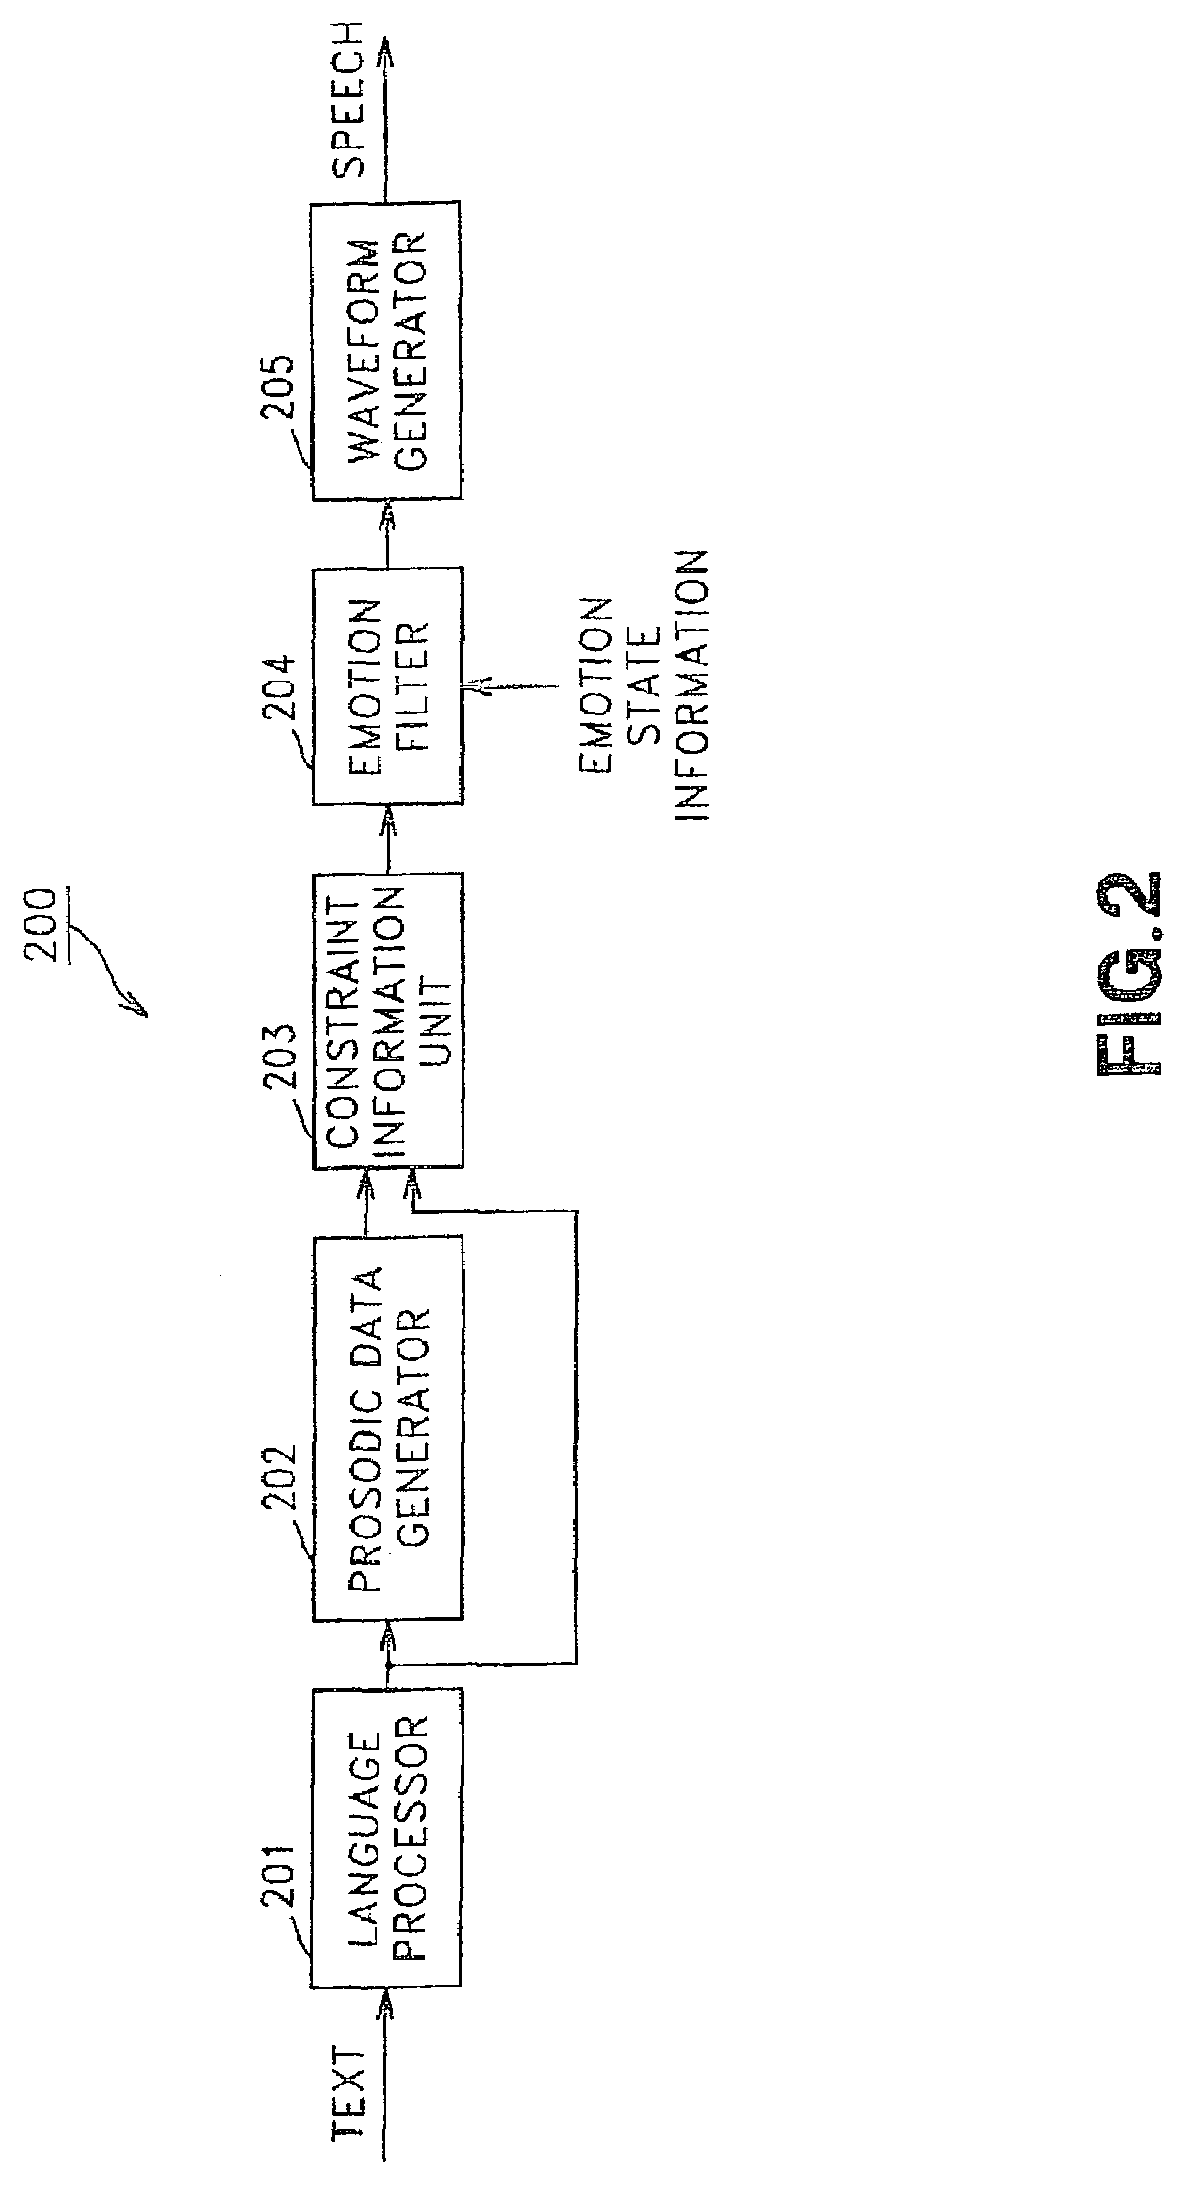 Method and apparatus for speech synthesis, program, recording medium, method and apparatus for generating constraint information and robot apparatus